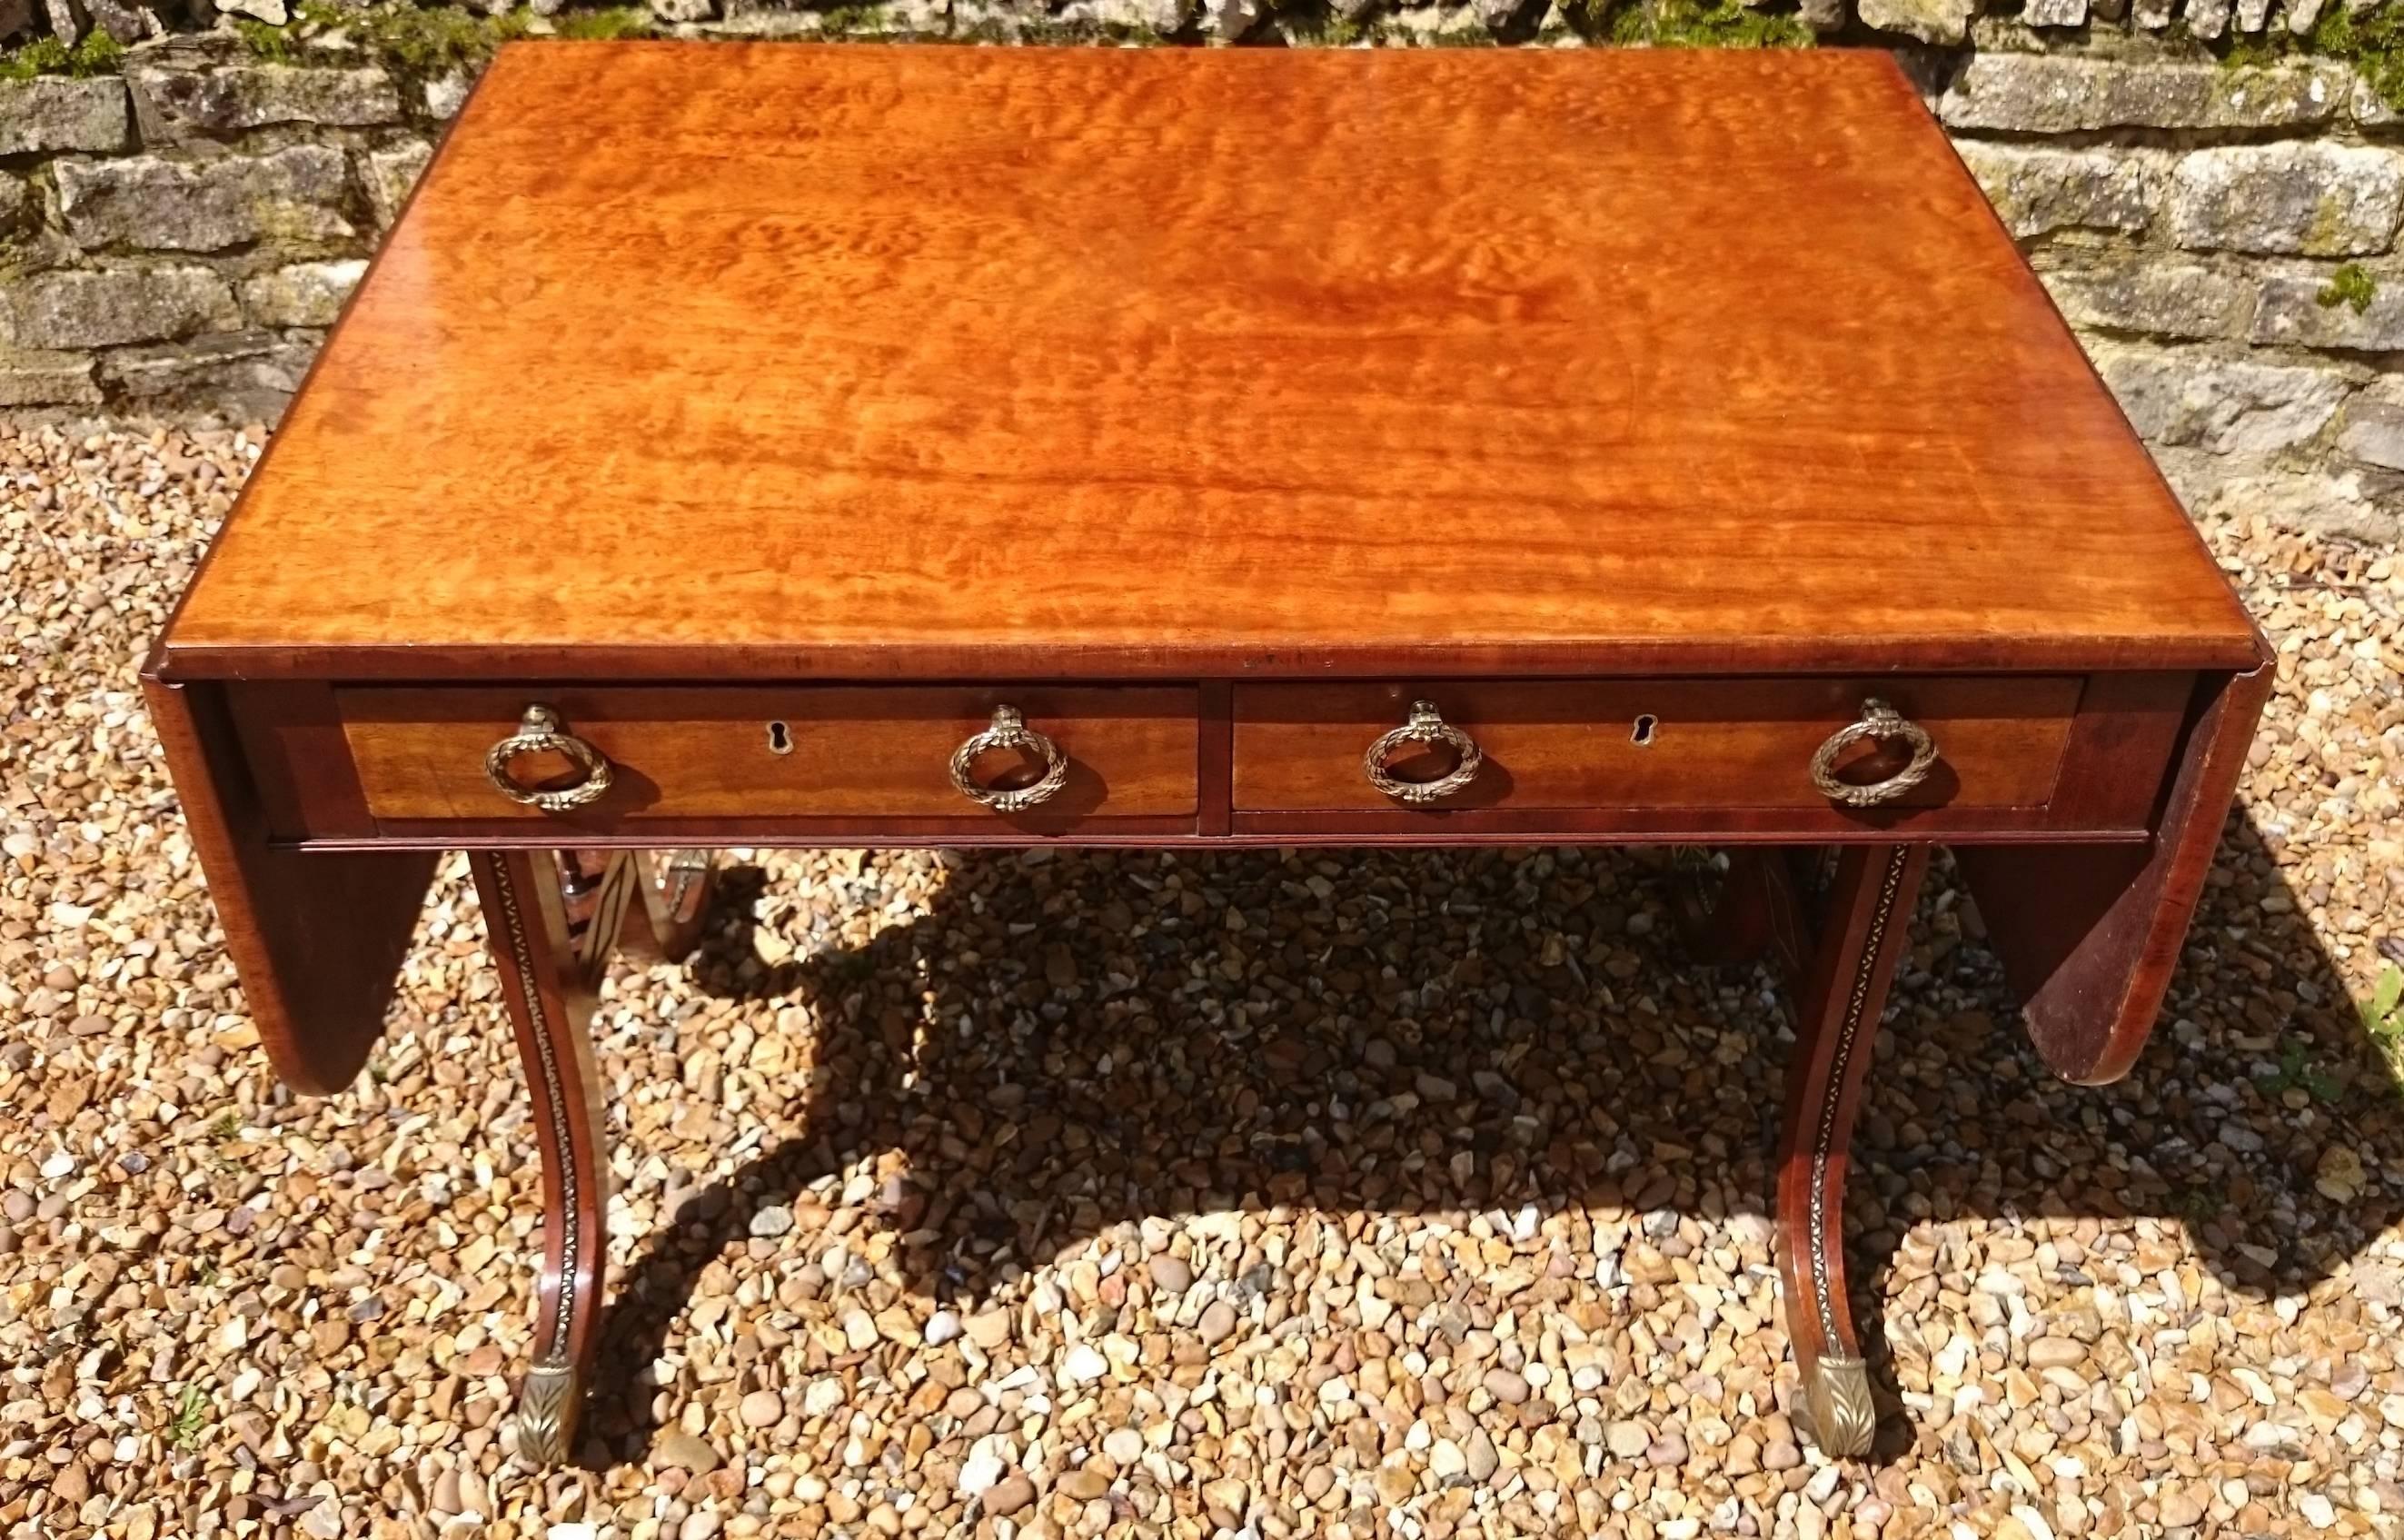 Very Fine Quality Early 19th Century Regency Mahogany Antique Sofa Table For Sale 1